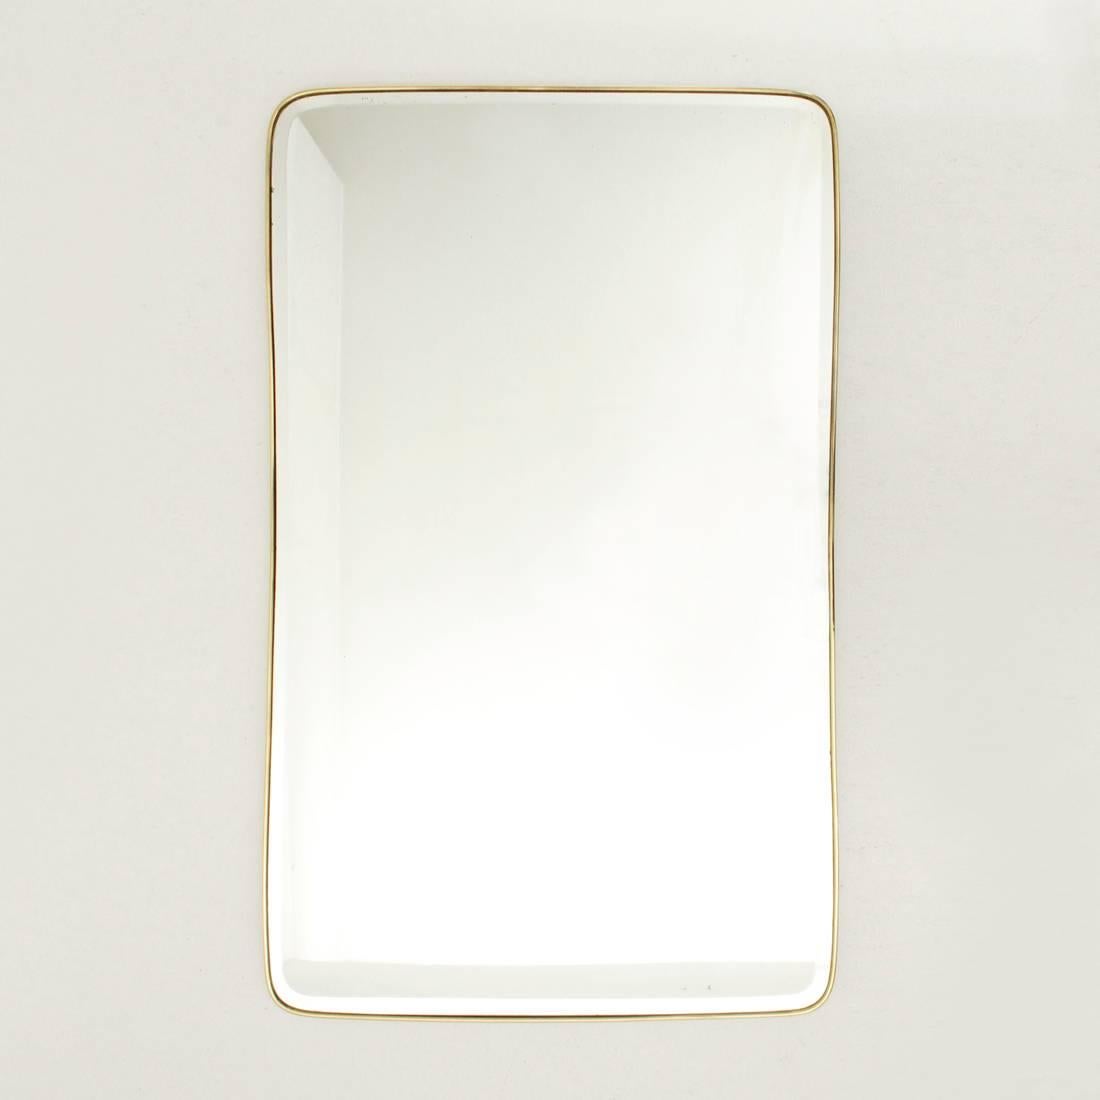 Italian mirror production of 1950s.
Wooden frame, mirrored glass with bevelled edges and brass frame.
Good general conditions, some film flaws on the mirror.

Dimensions: Width 65 cm - Depth 3 cm - Height 106 cm